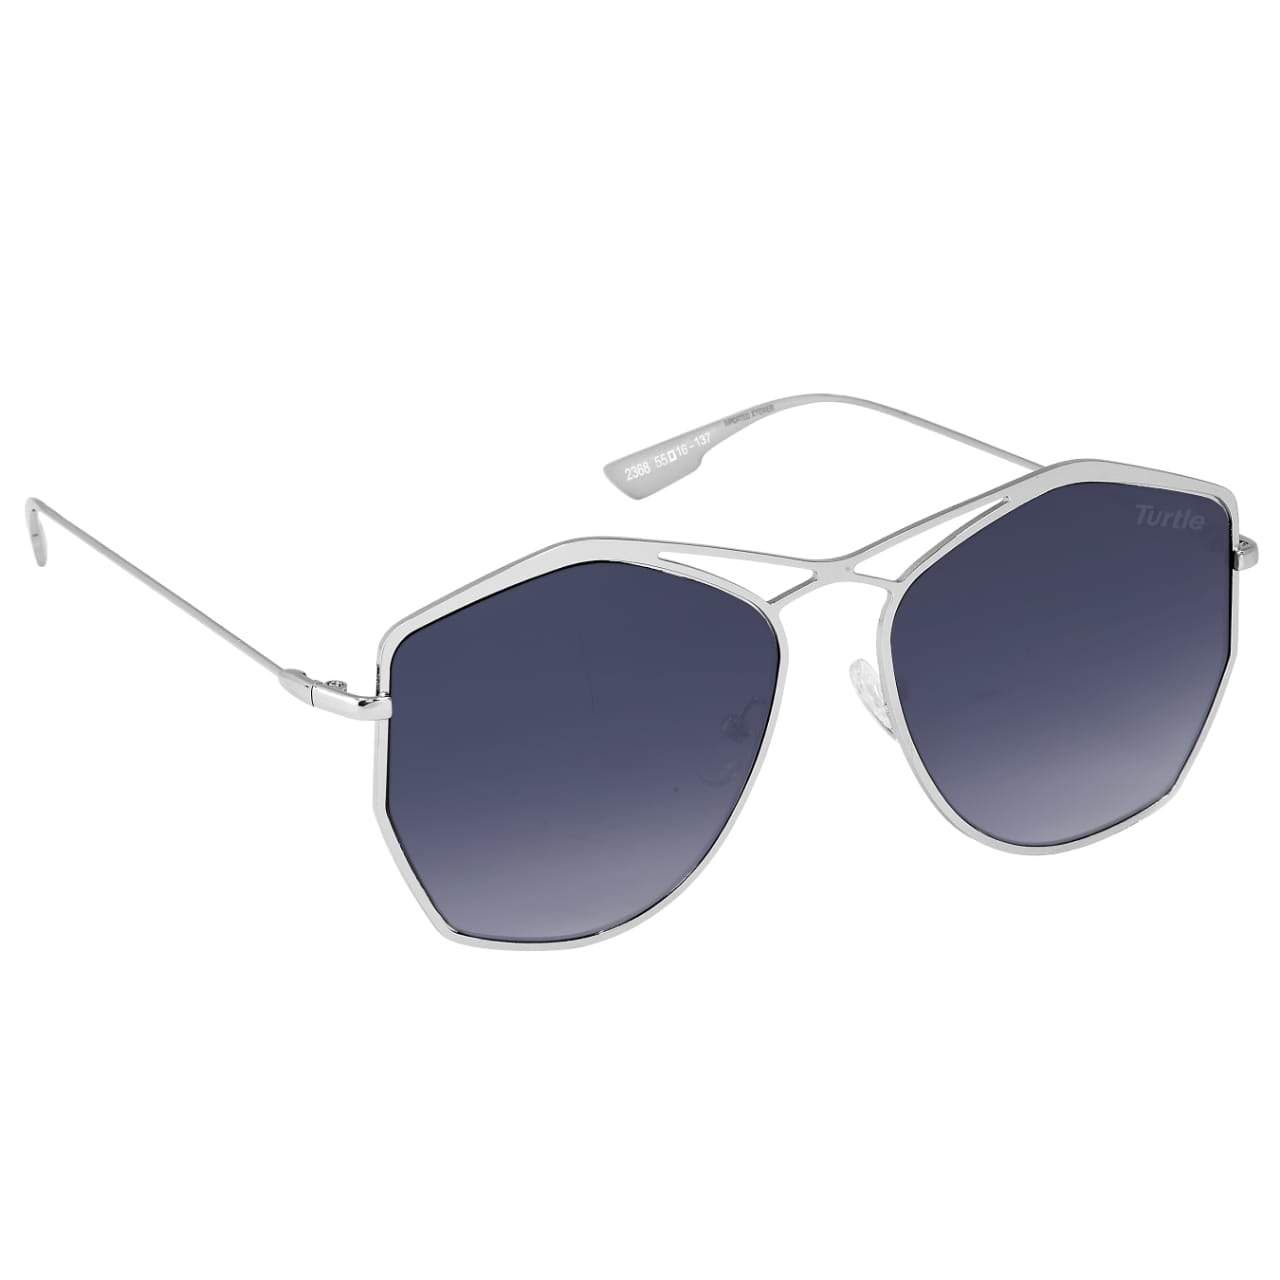 Brand New 2020 Design Metal High Quality Blue Gradient Cross Angle Luxury Sunglasses For Men And Women-Unique and Classy